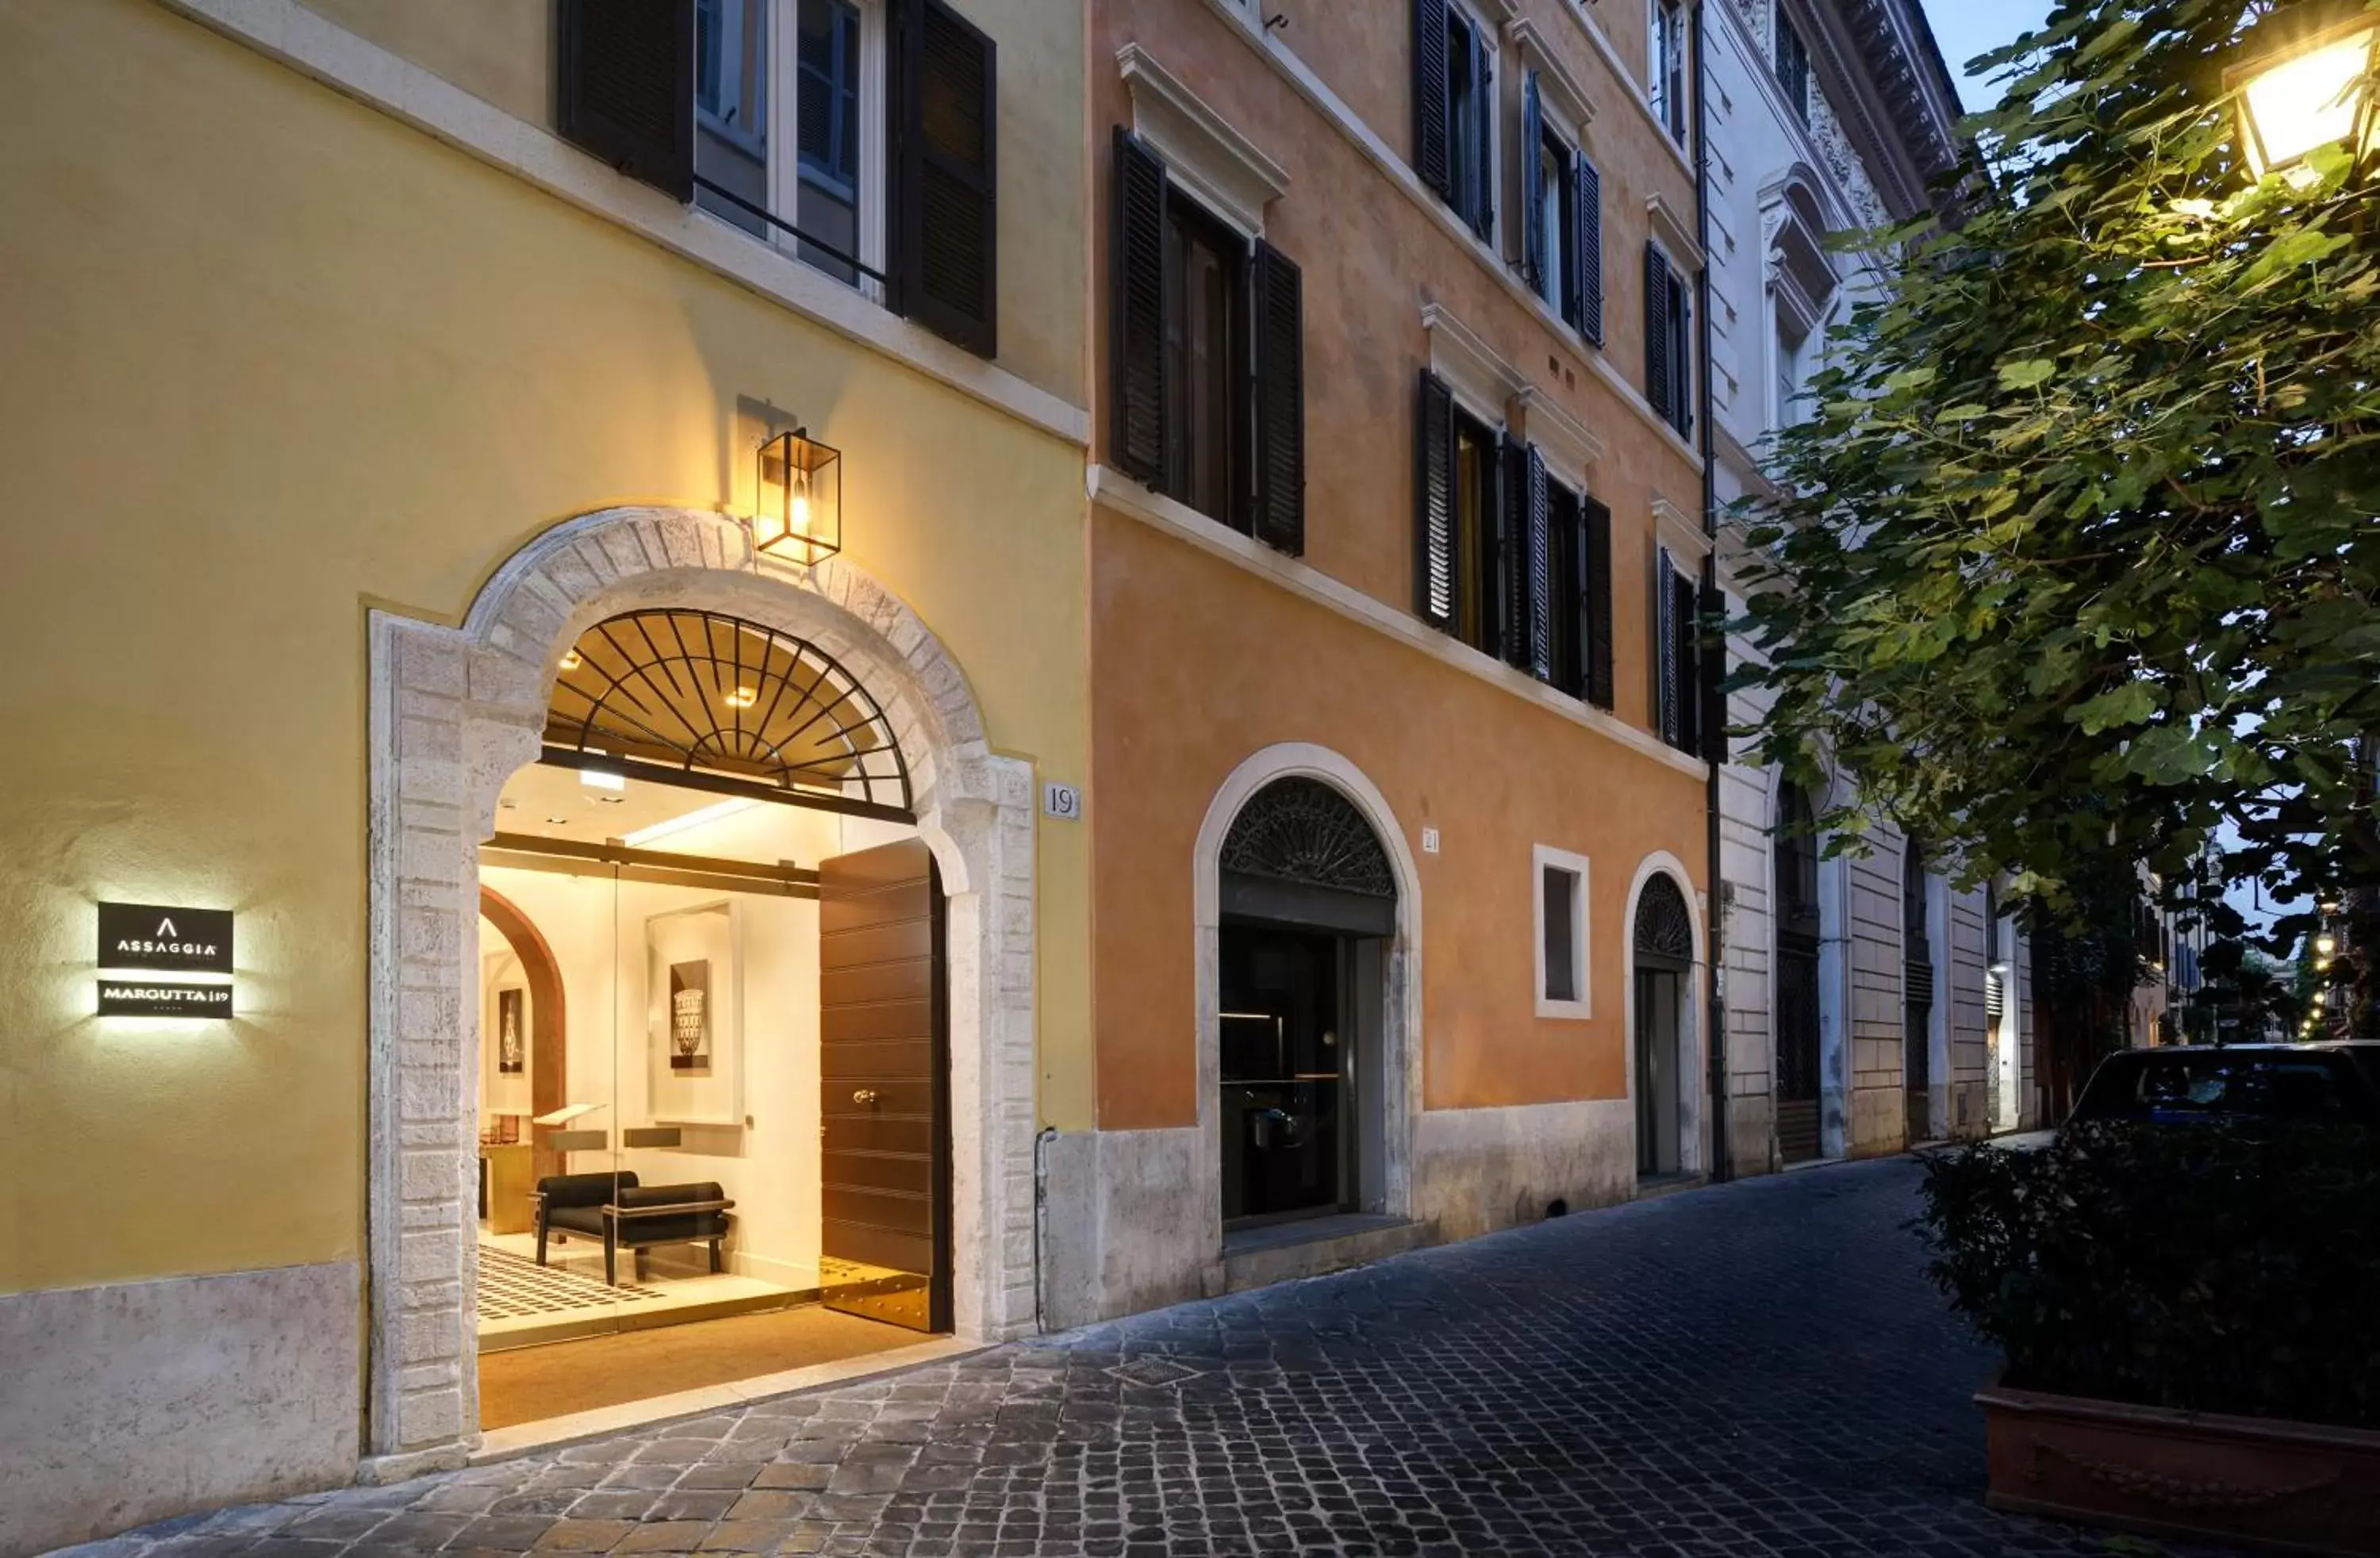 Property building in Margutta 19 - Small Luxury Hotels of the World